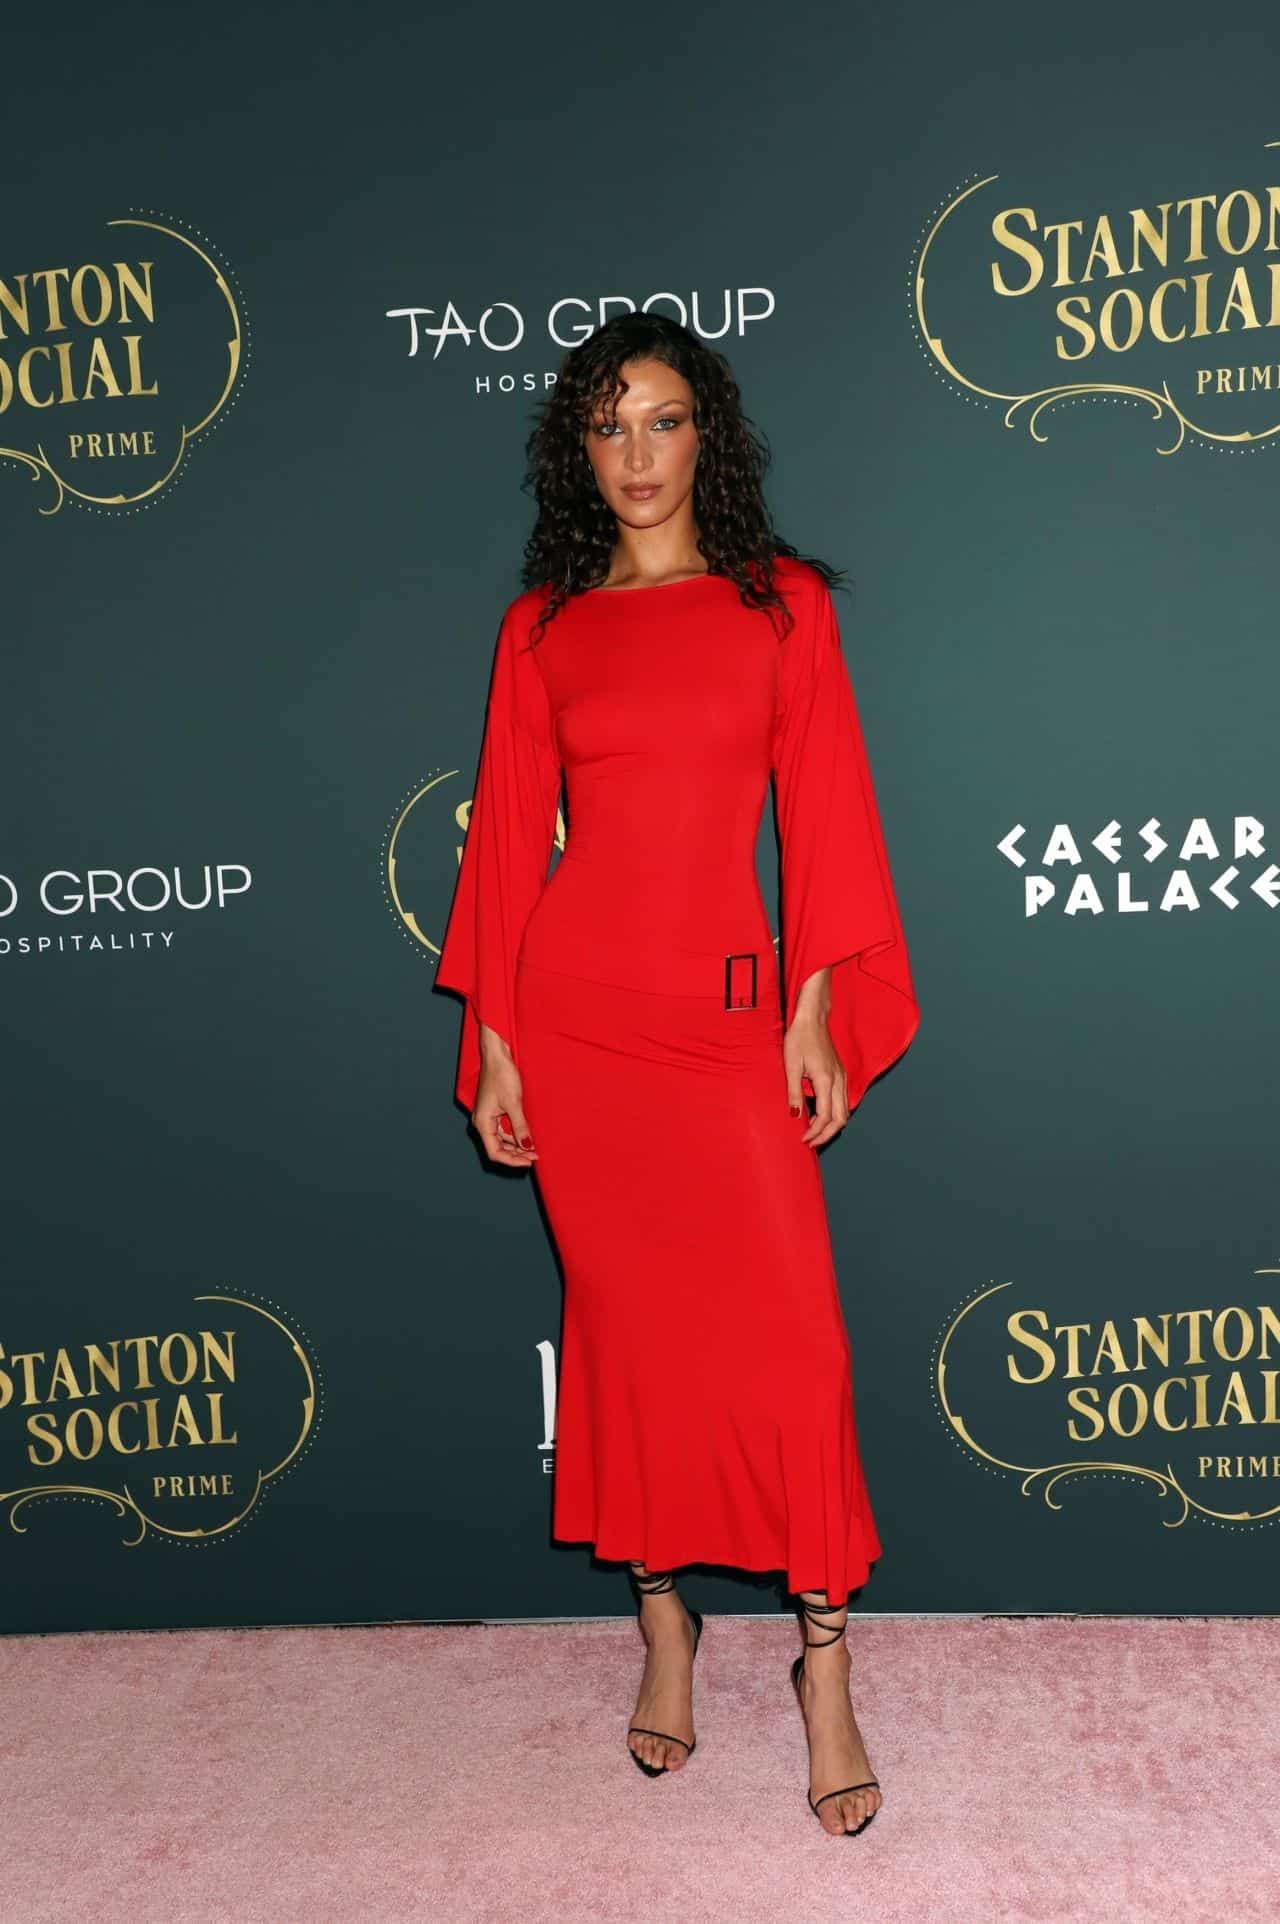 Bella Hadid in a Scarlet Gown at the Opening of Stanton Social Prime